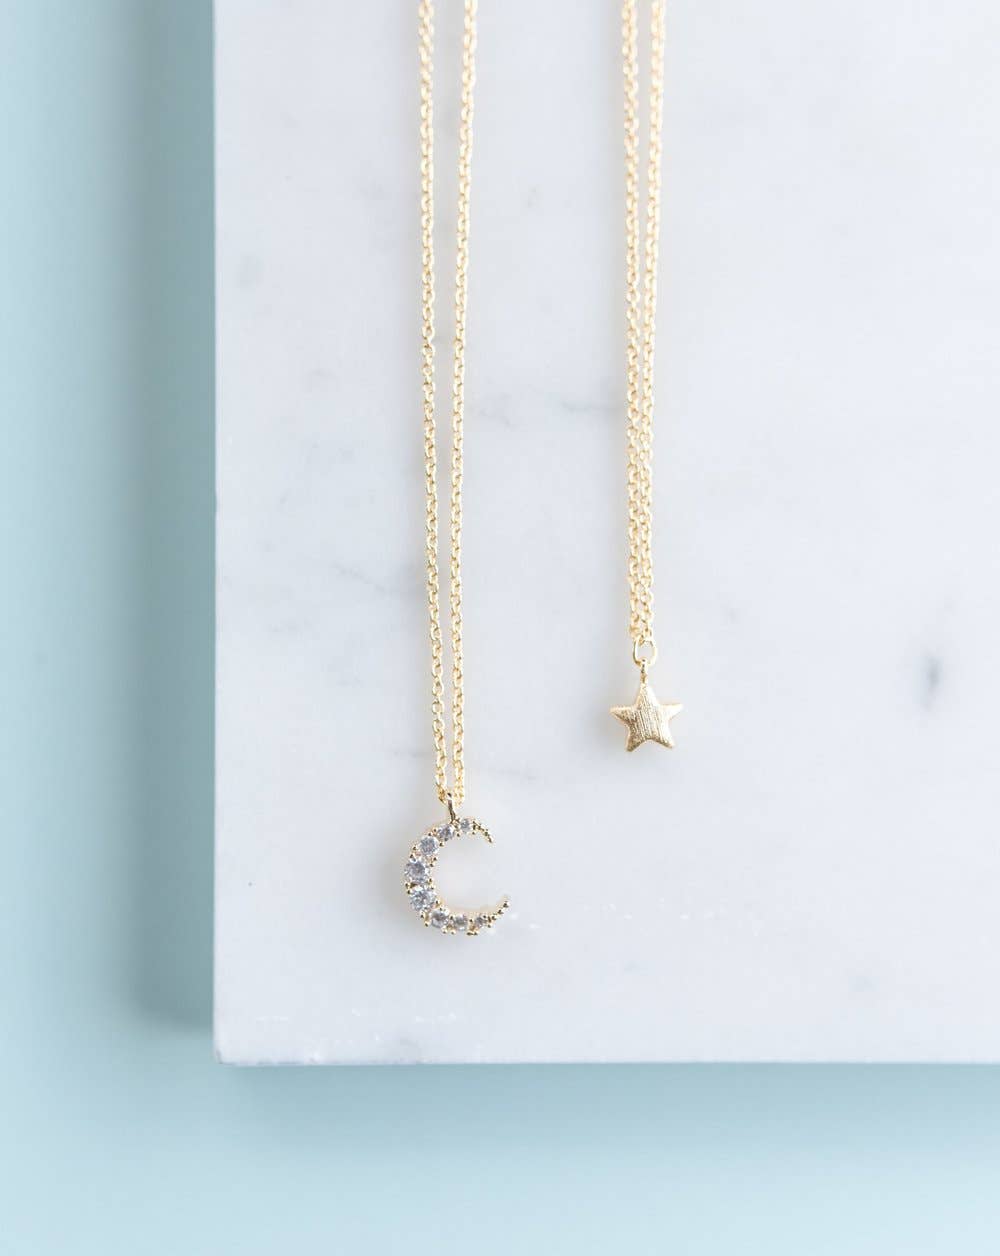 Helmsie - Momma + Me Moon and Star Necklace Set